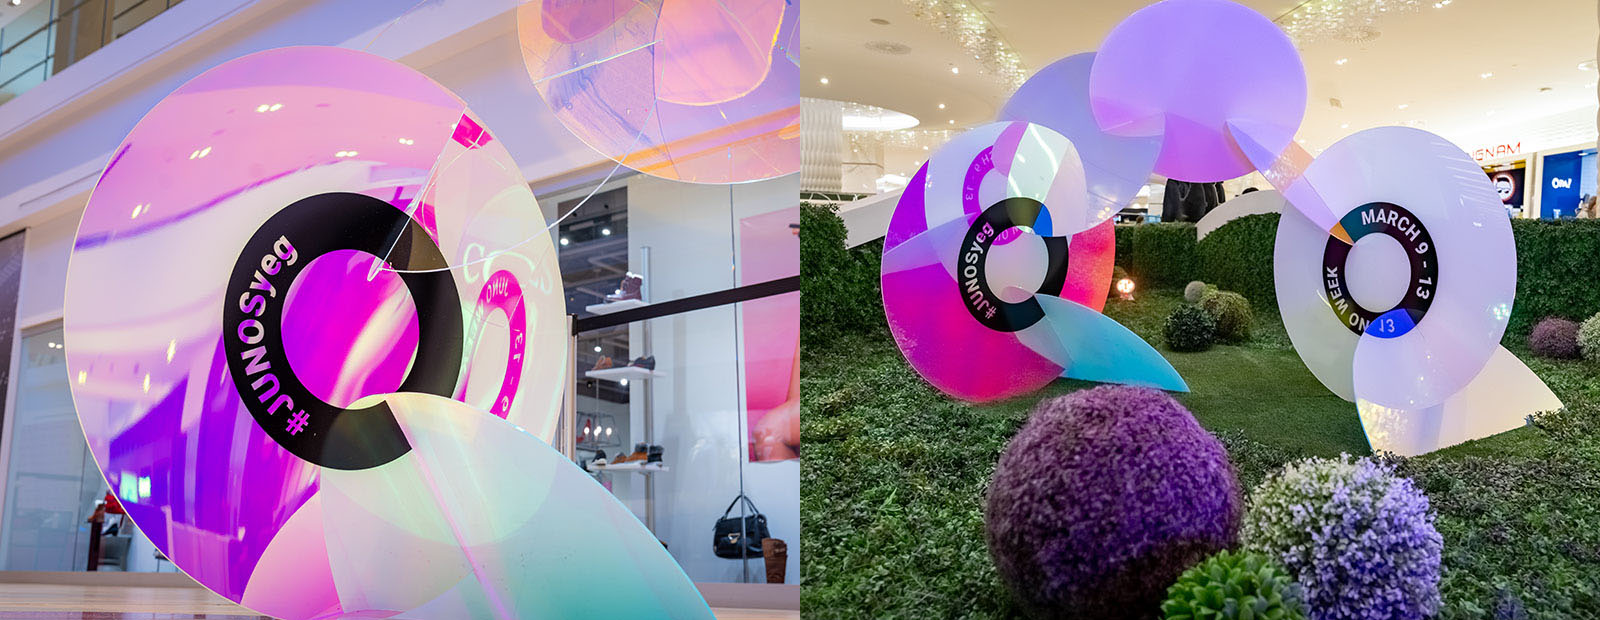 A side-by-side shot of two art installations, each one consisting of large, iridescent acrylic sculptures of vinyl records that bear the hashtag #JUNOSyeg. The art installations are located in Kingsway Garden Mall and West Edmonton Mall in Edmonton.